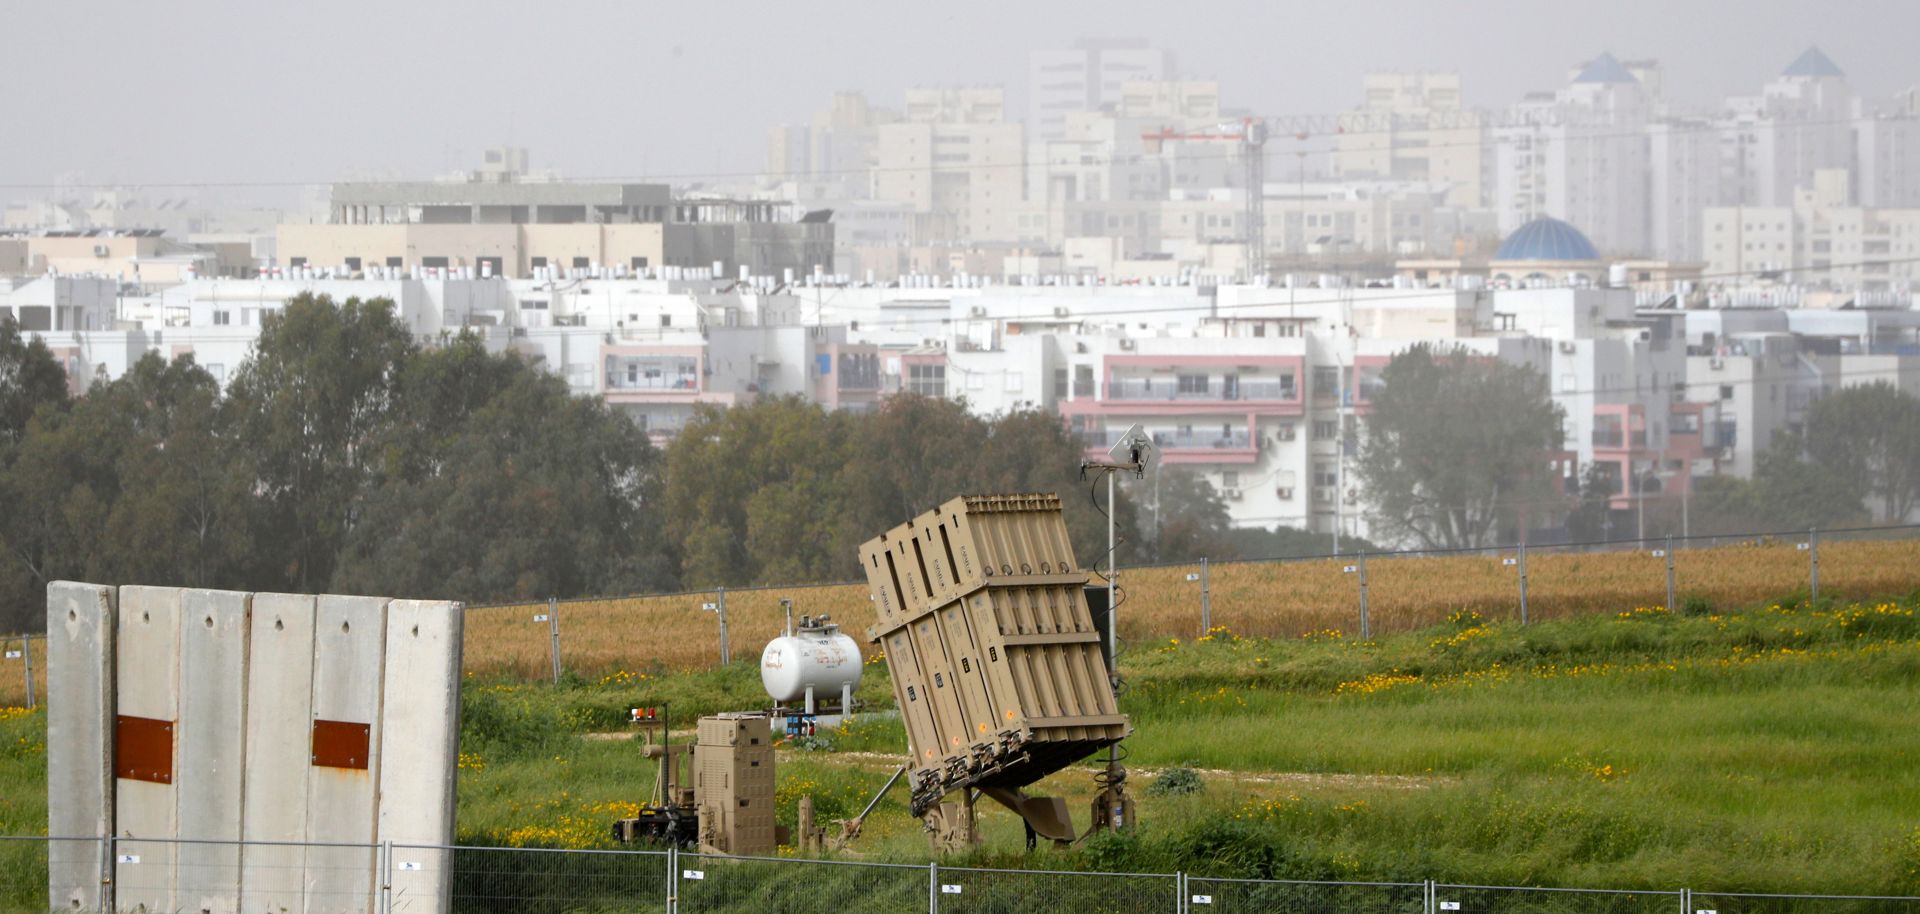 An Iron Dome battery, designed to intercept and destroy incoming short-range rockets and artillery shells, is pictured on March 30, 2019, in the Israeli town of Ashdod.